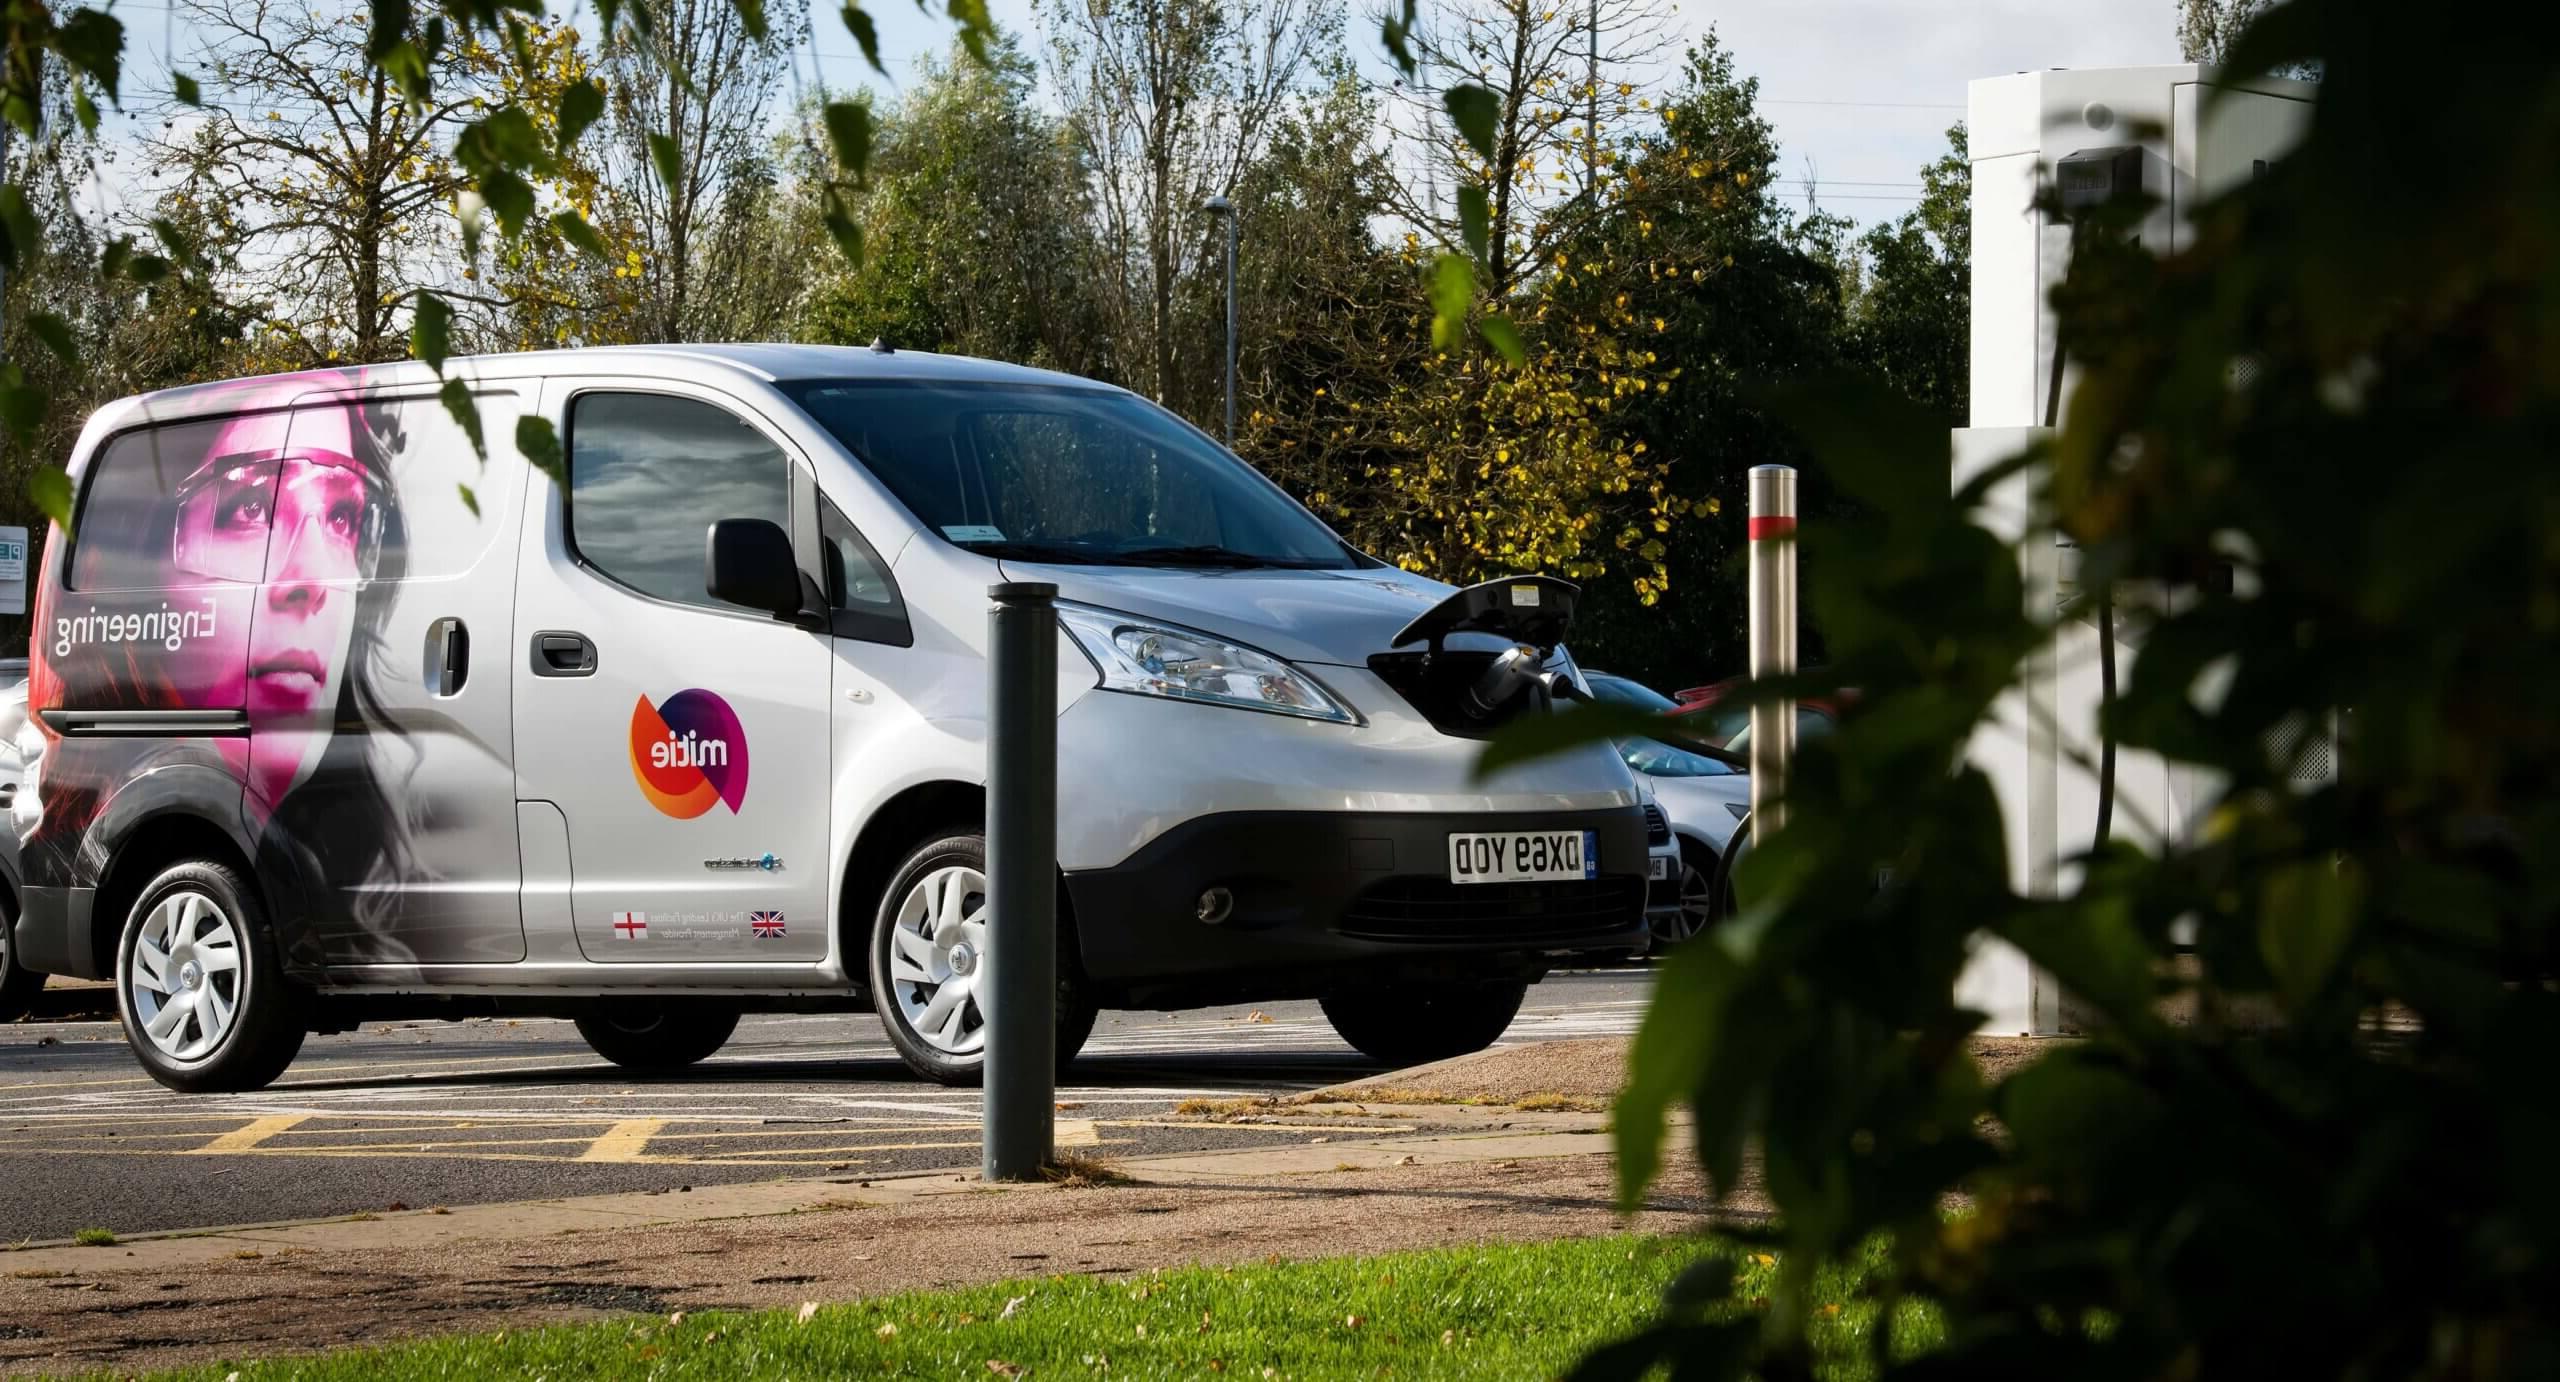 Mitie branded-van plugged into an electric charger